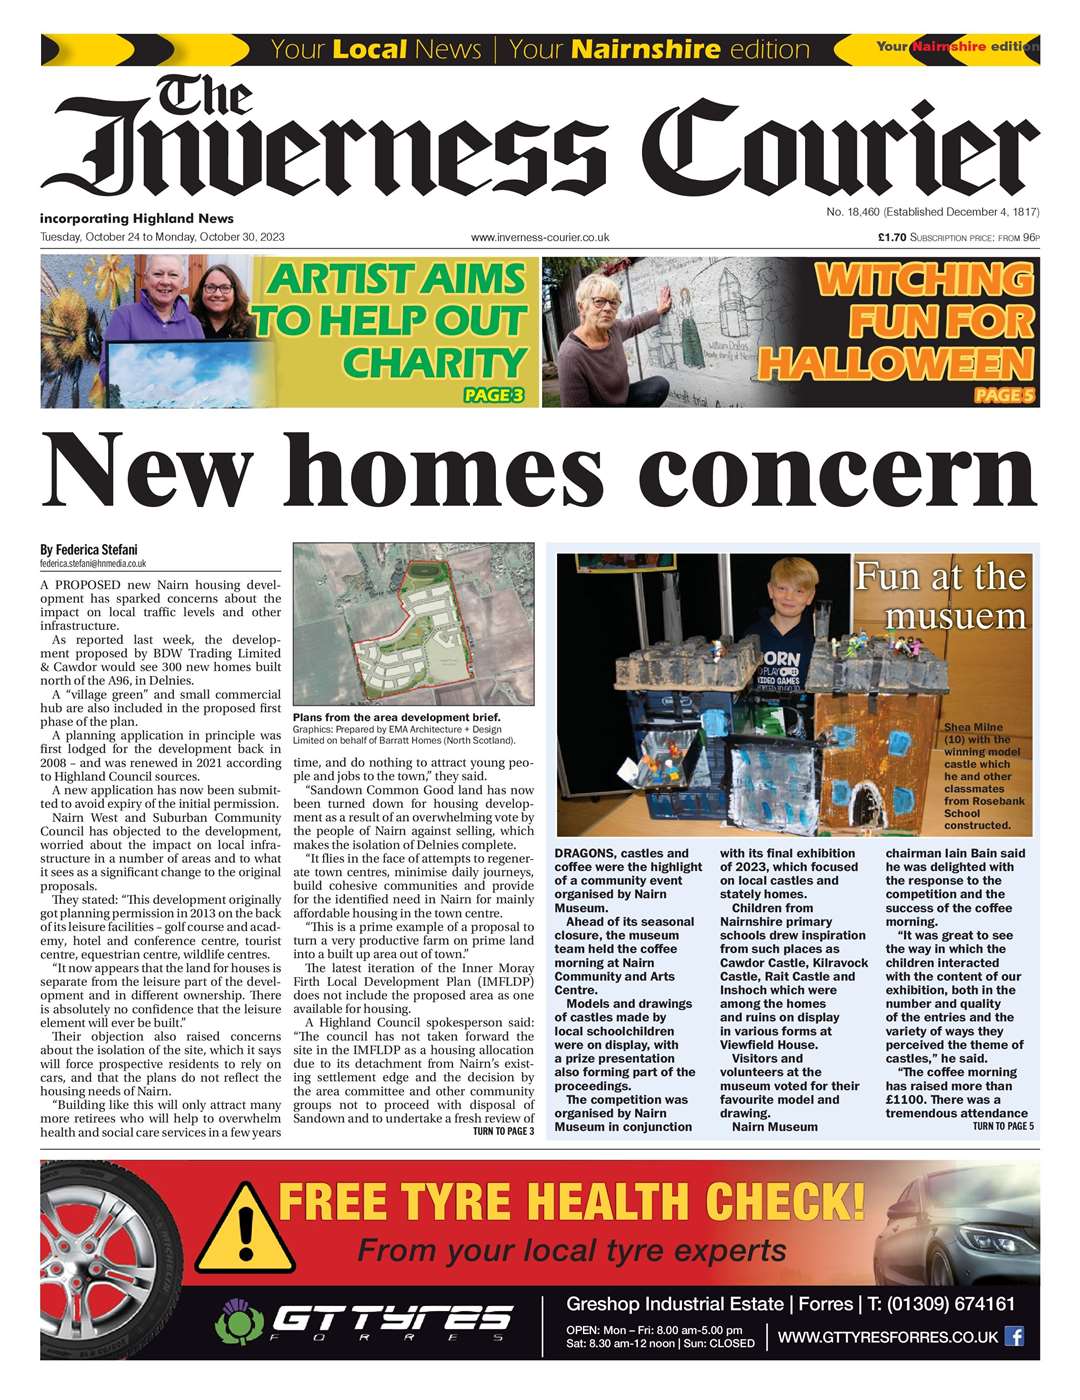 The Inverness Courier (Nairnshire edition), October 24, front page.